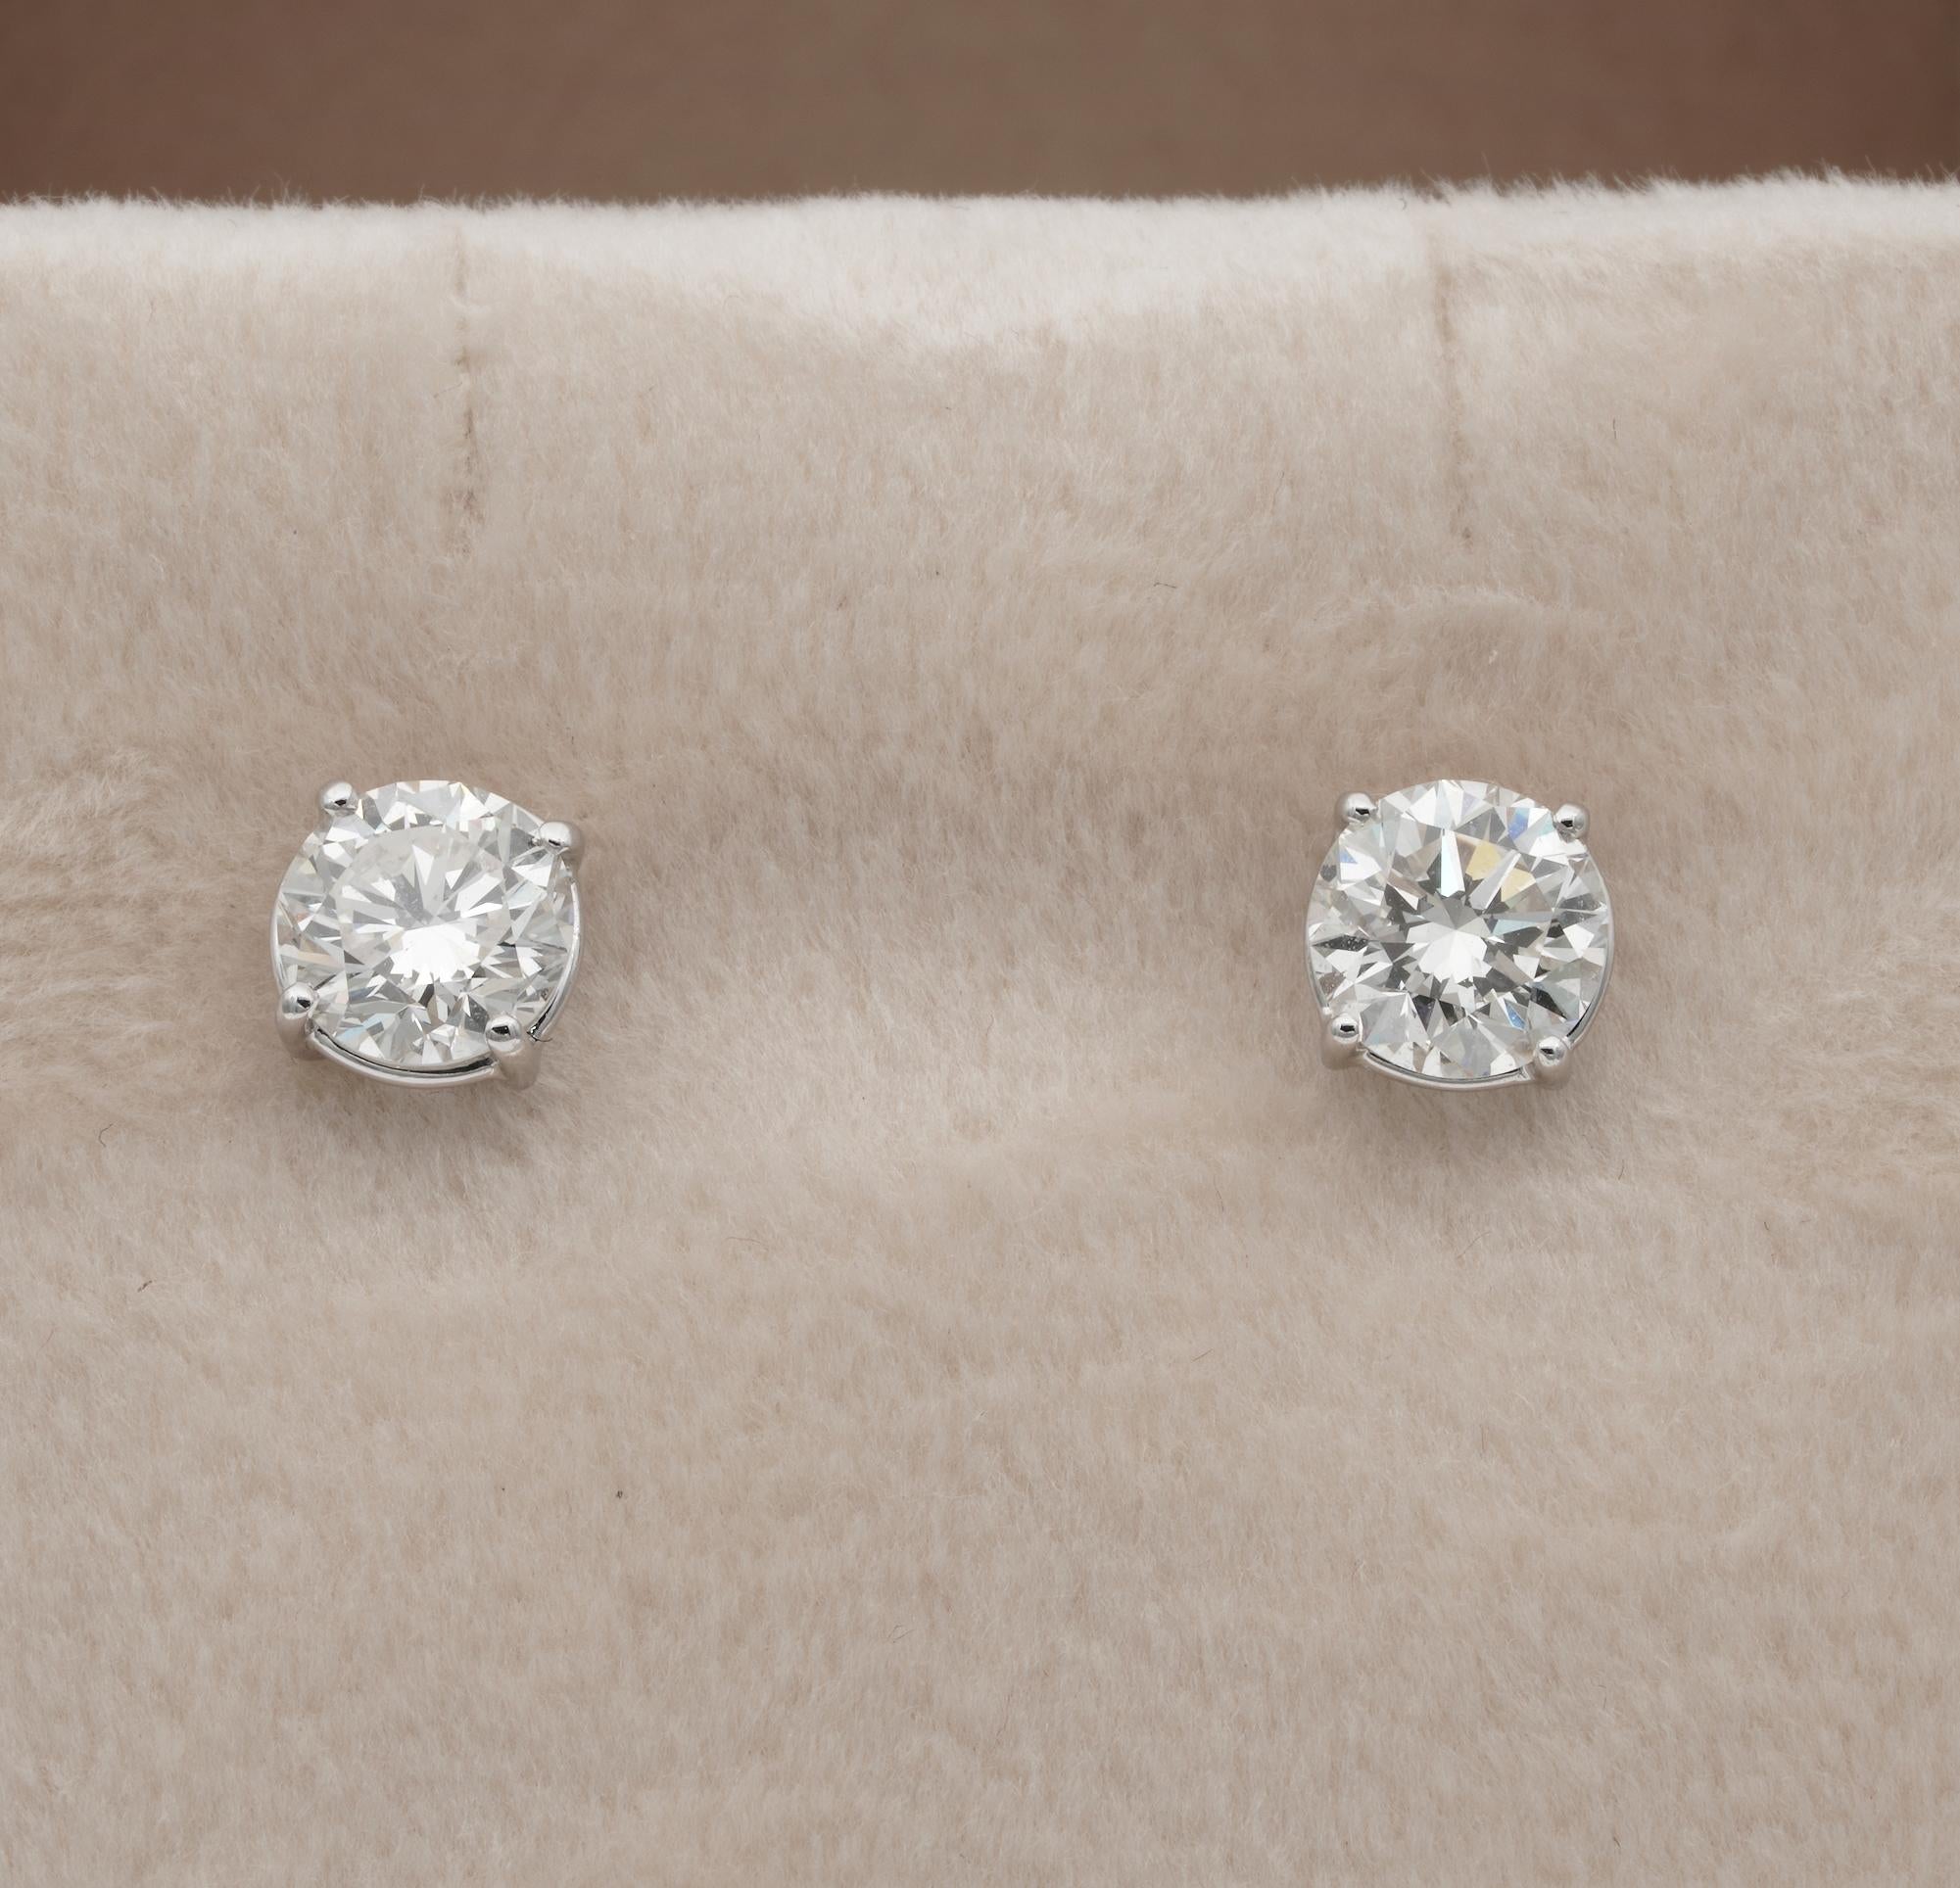 Light Flash!
The perfect everyday always on Solitaire Diamond studs to wear and enjoy all the time
1.65 Ct round Brilliant cut come with IGN certificate – rated as I/J VS – polish very good – fluorescence none /slight
Diameter is 7.5 mm.
They glow